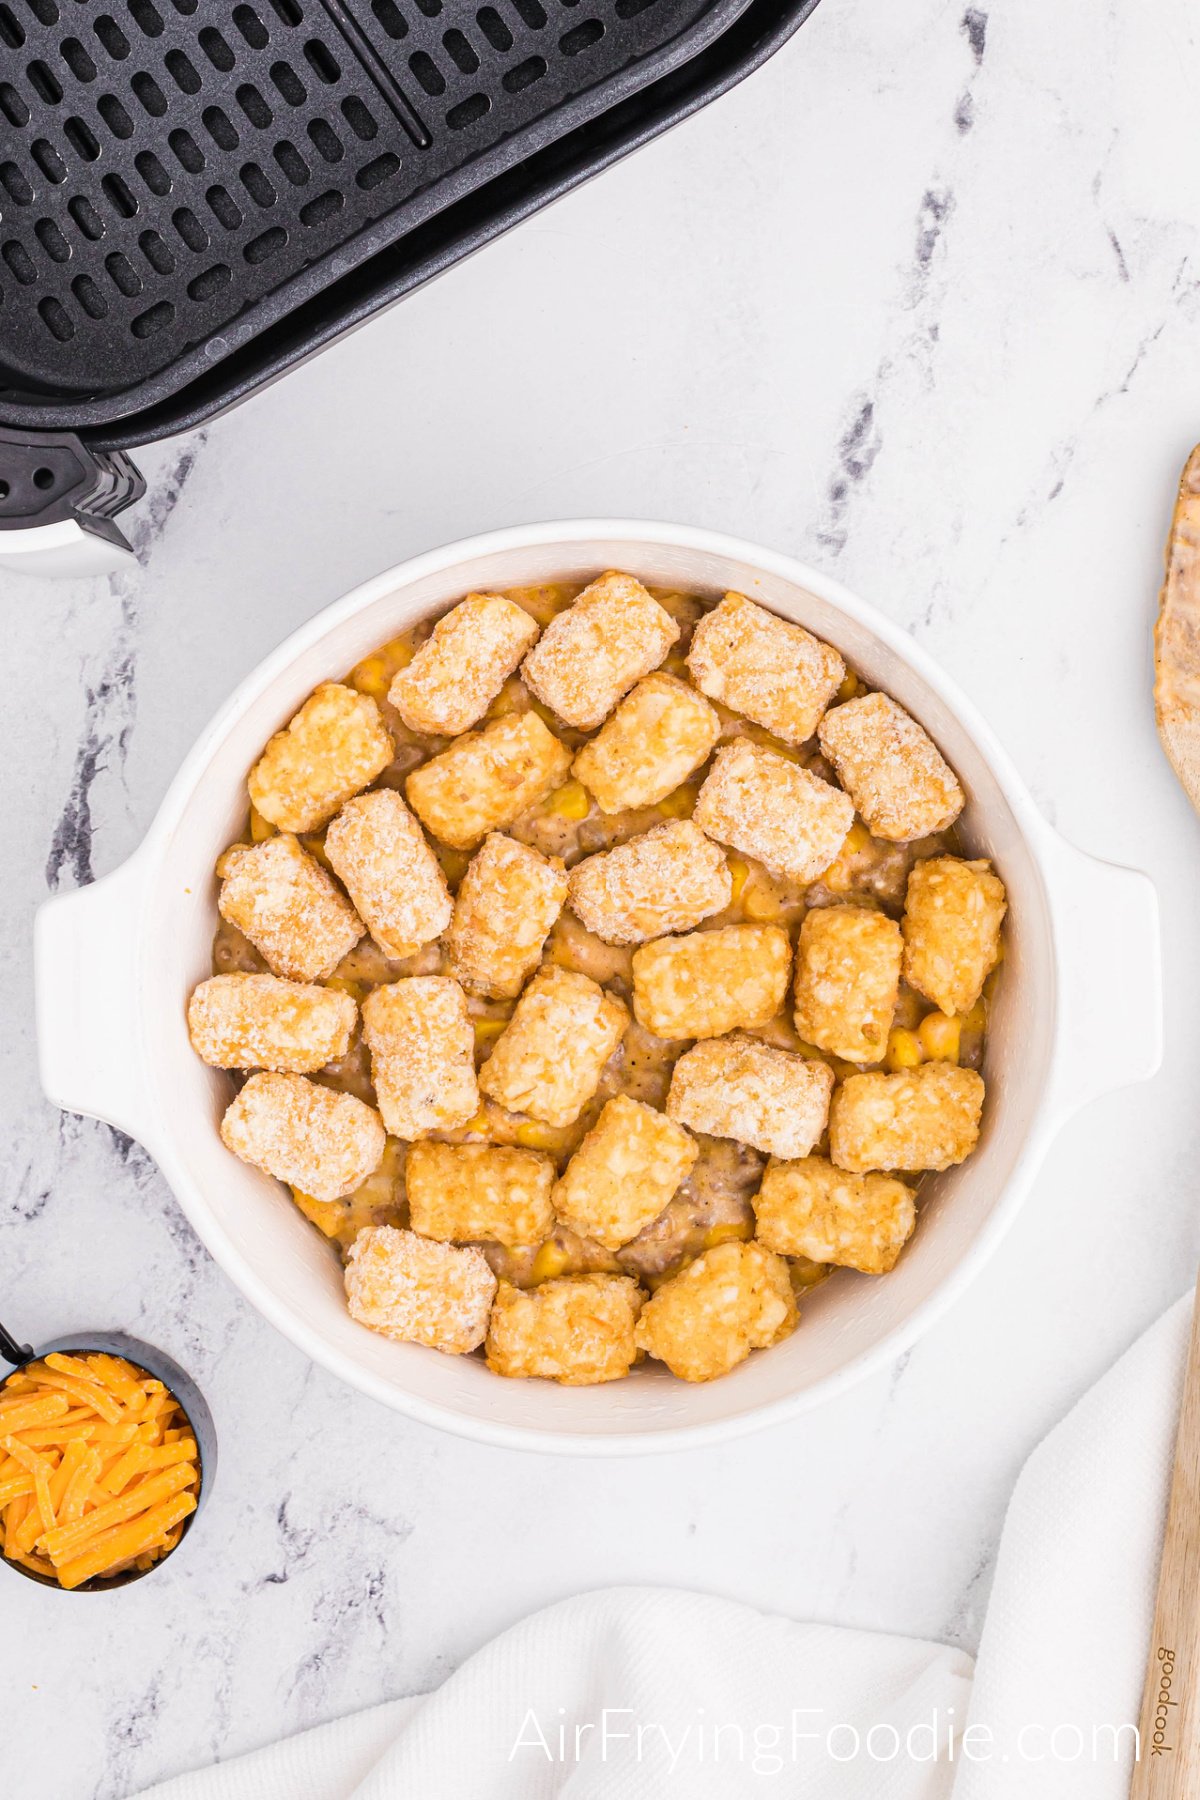 A round white bowl with layers of tater tots and seasoned ground beef with tater tots as the top layer. A small portion of the air fryer basket and wooden spoon are also in the picture, with a small measuring cup of shredded cheddar cheese.